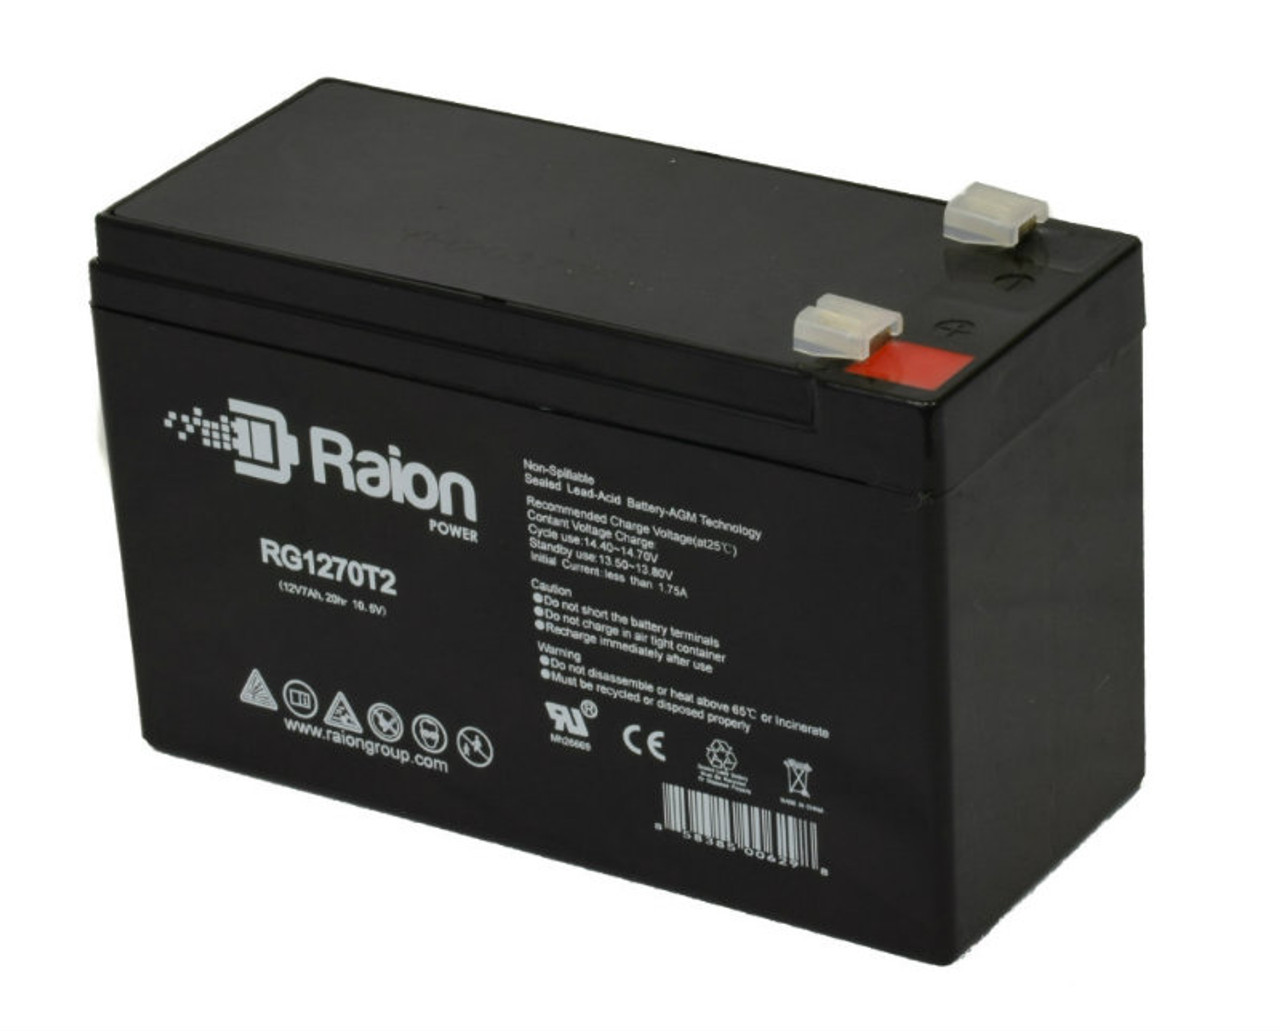 Raion Power RG1270T1 12V 7Ah Non-Spillable Replacement Battery for Newmox FNC-1272